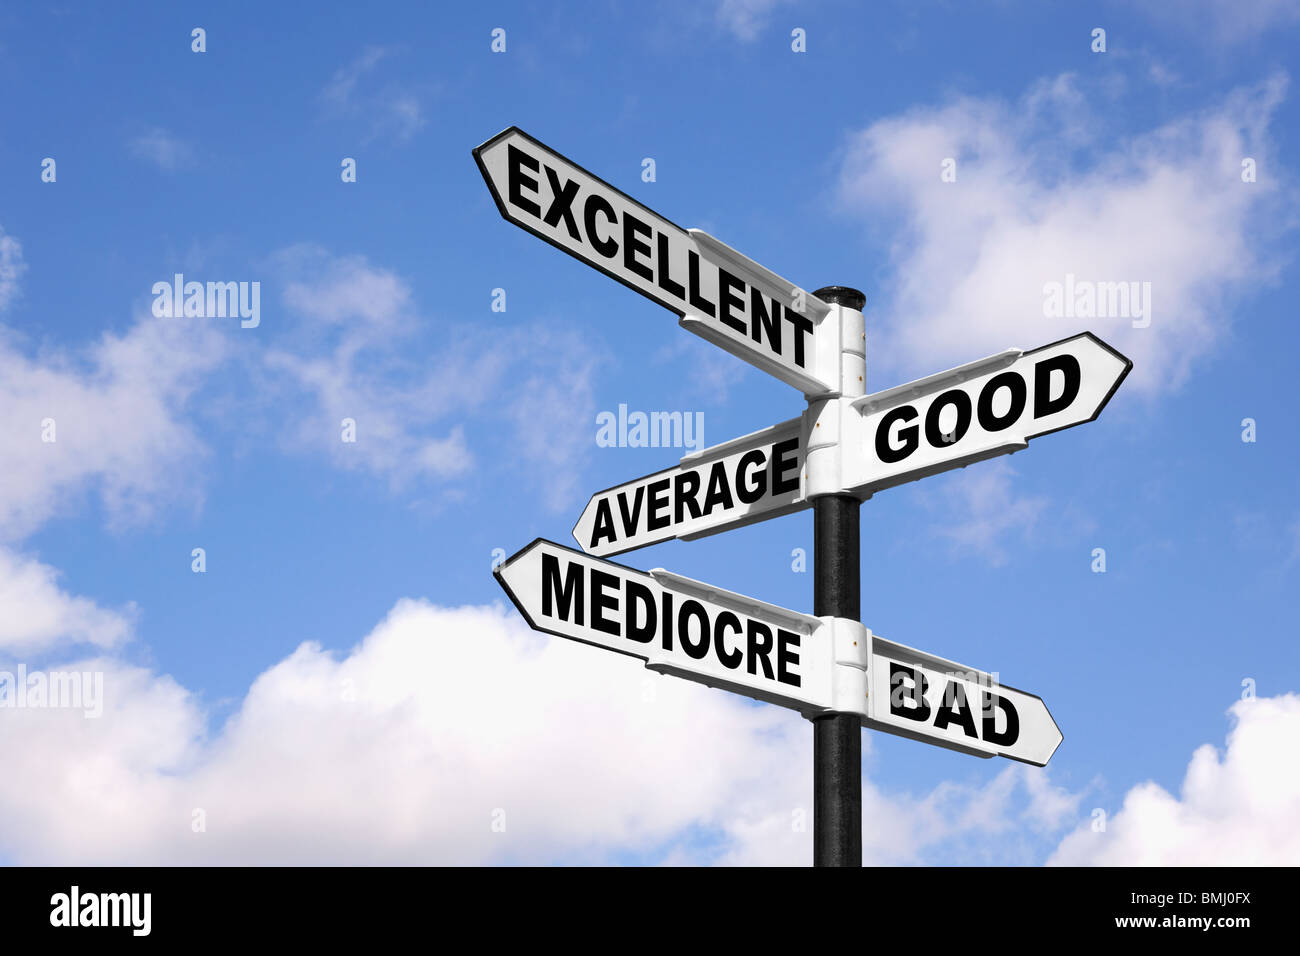 Signpost with the words Excellent, Good, Average, Mediocre and Bad against a blue cloudy sky. Stock Photo